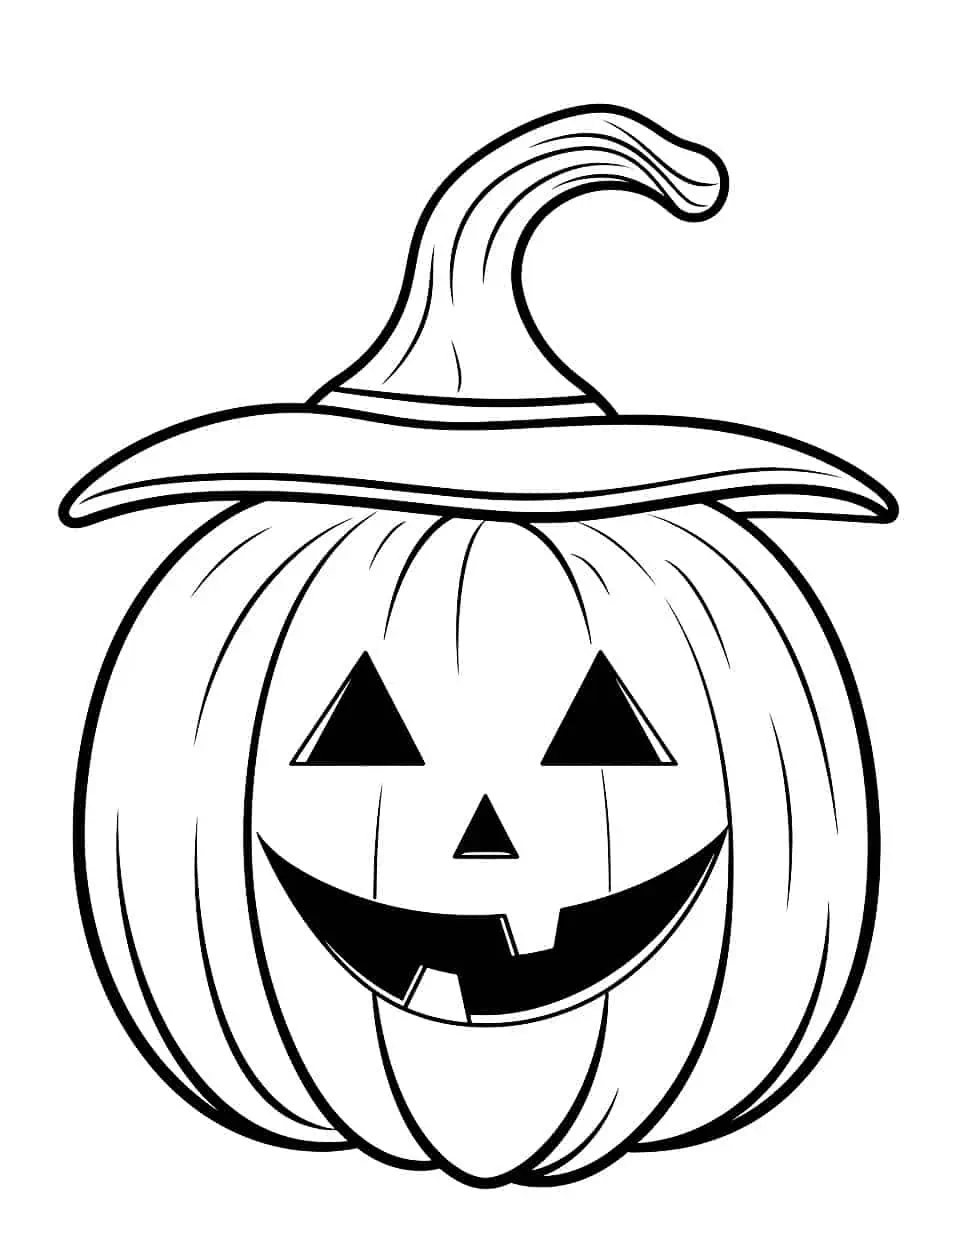 Cute Halloween Pumpkin Coloring Page - A cute, smiling pumpkin, wearing a witch’s hat.